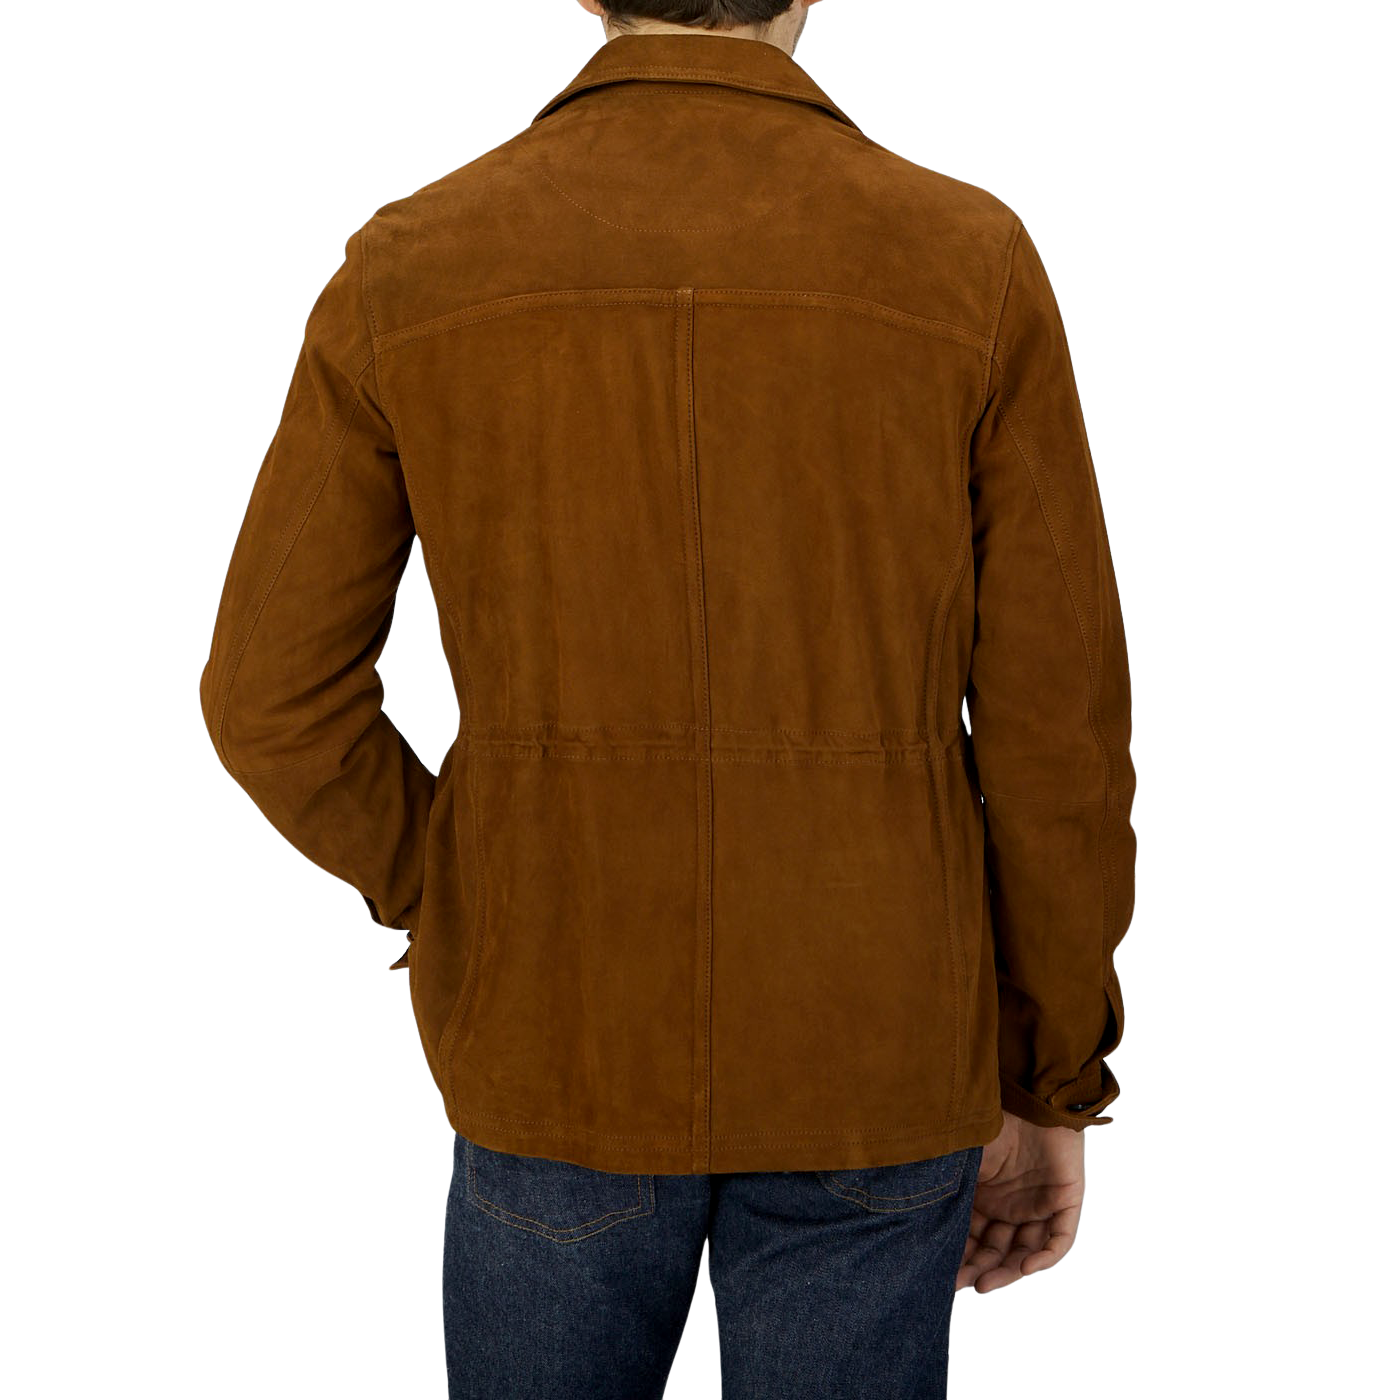 The back view of a man wearing a Werner Christ Sandalwood Suede Leather Anton Jacket.